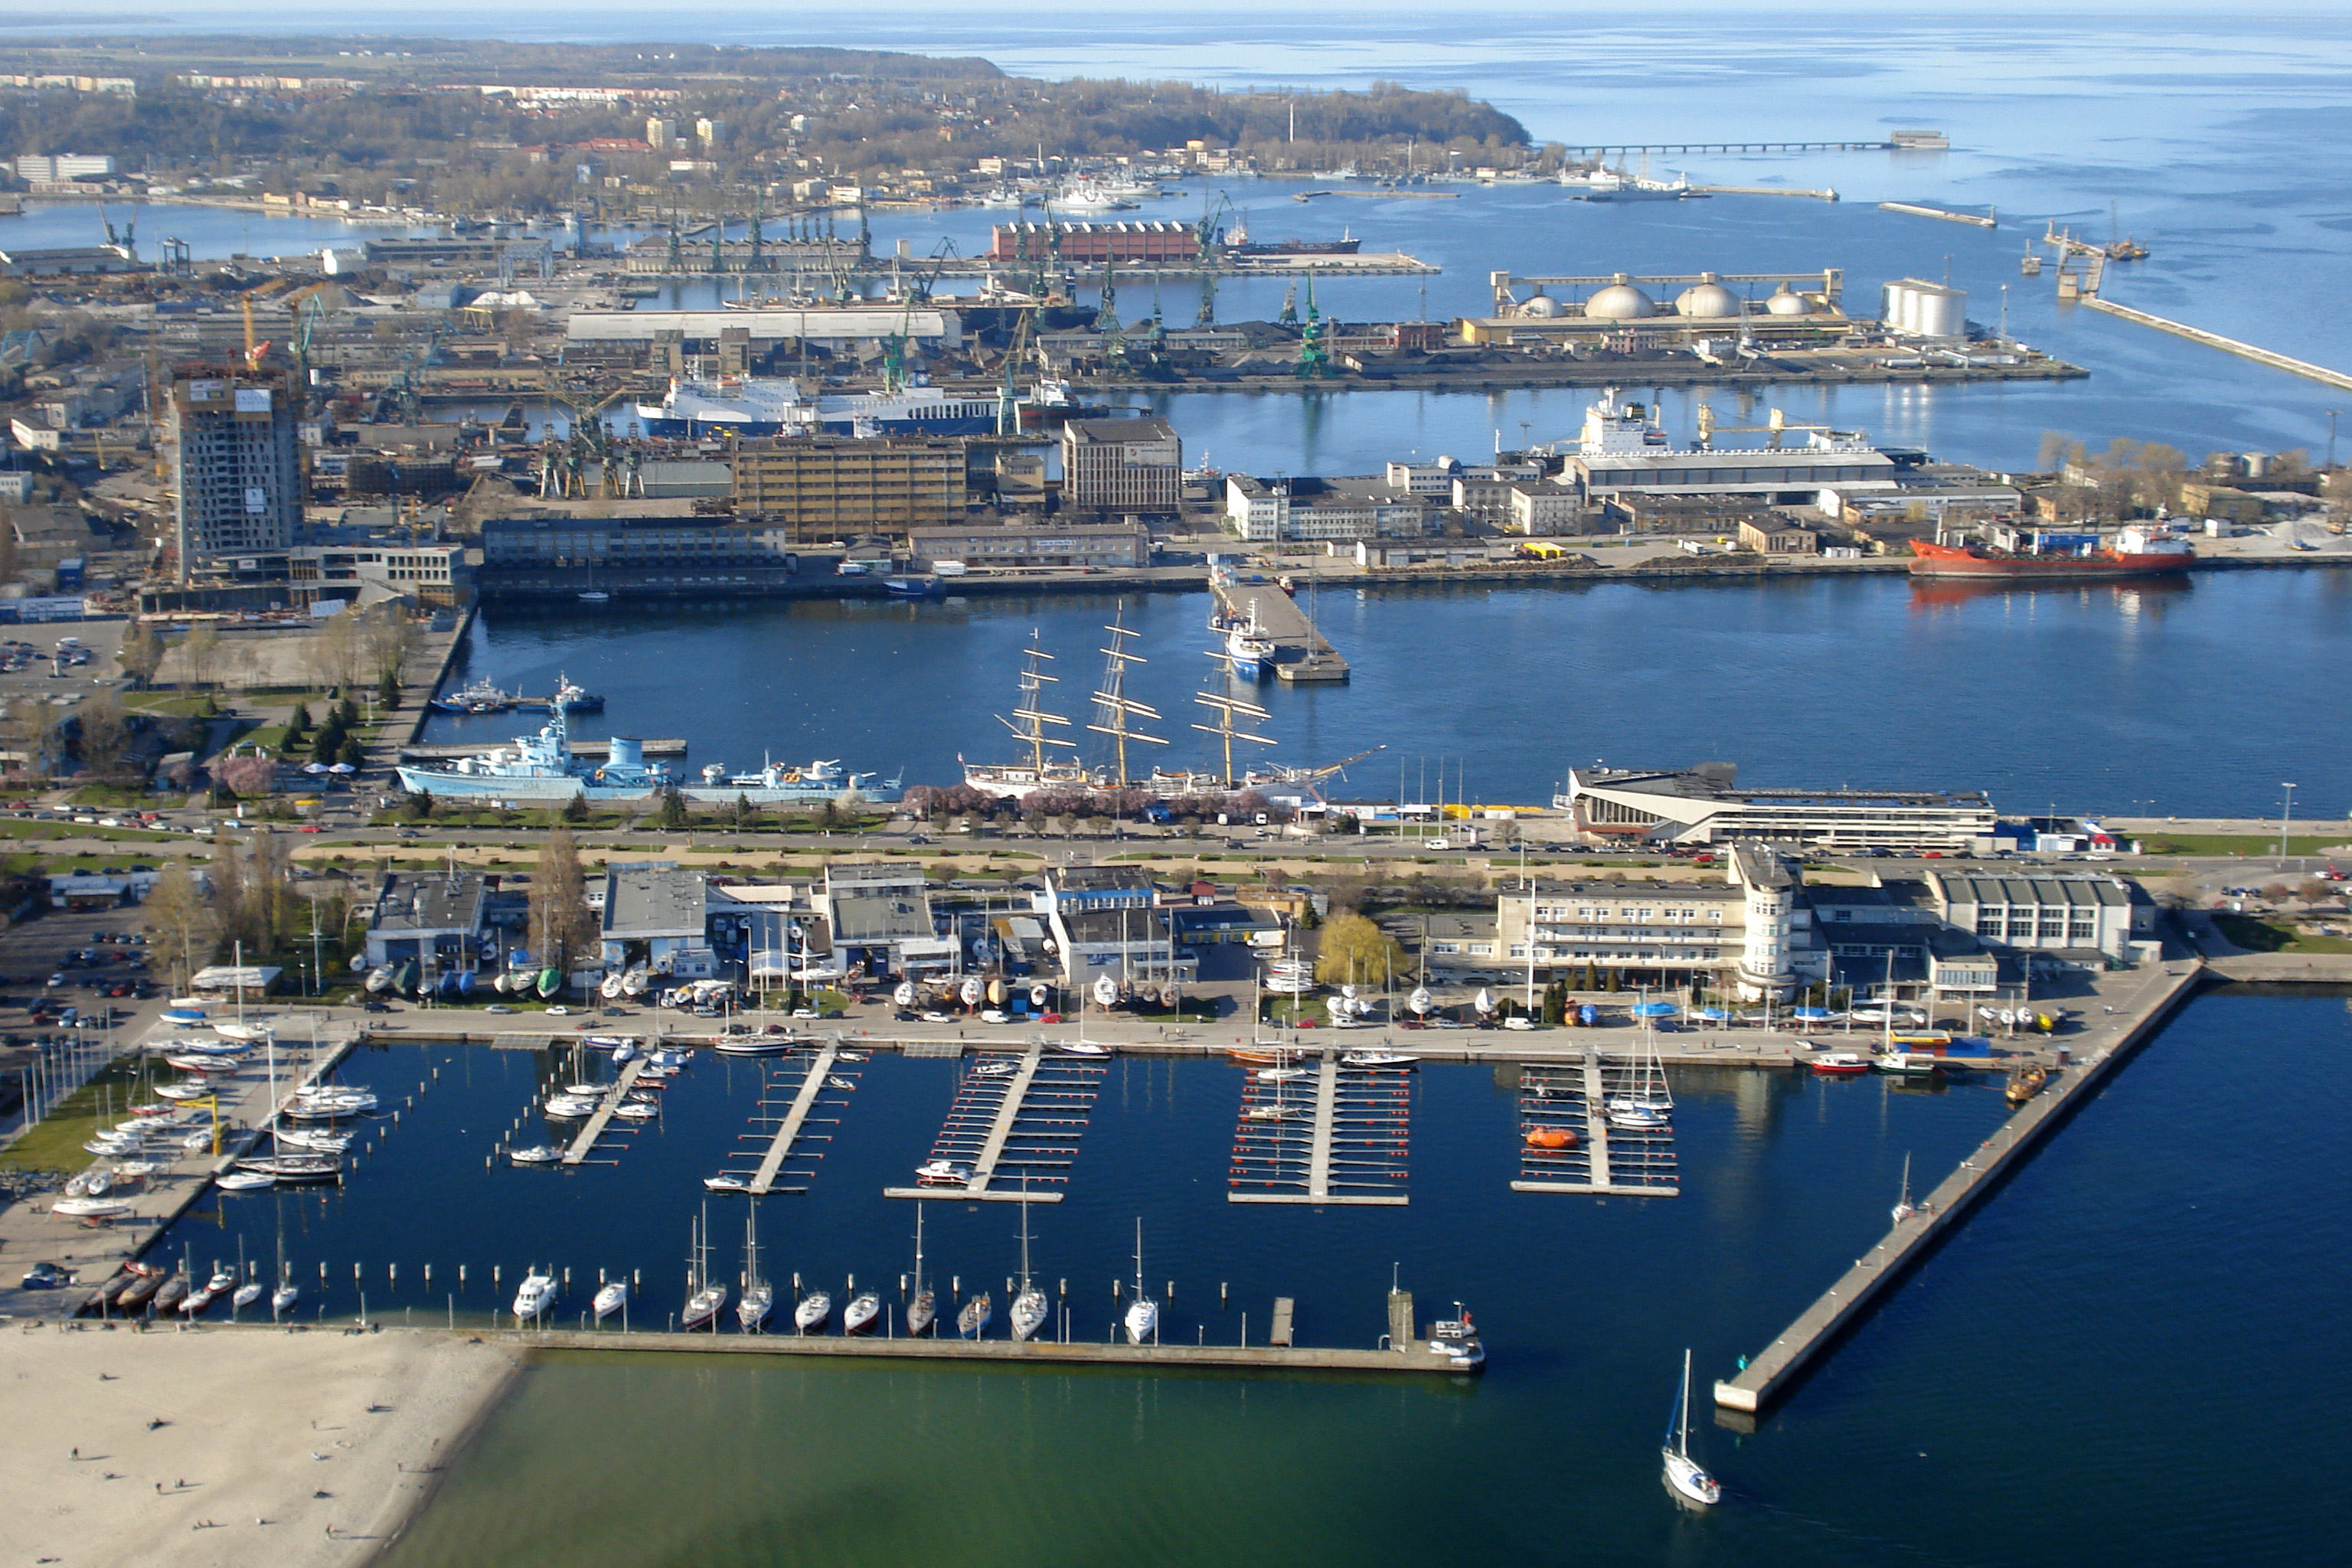 port-of-gdynia-with-ships-and-docks-image-free-stock-photo-public